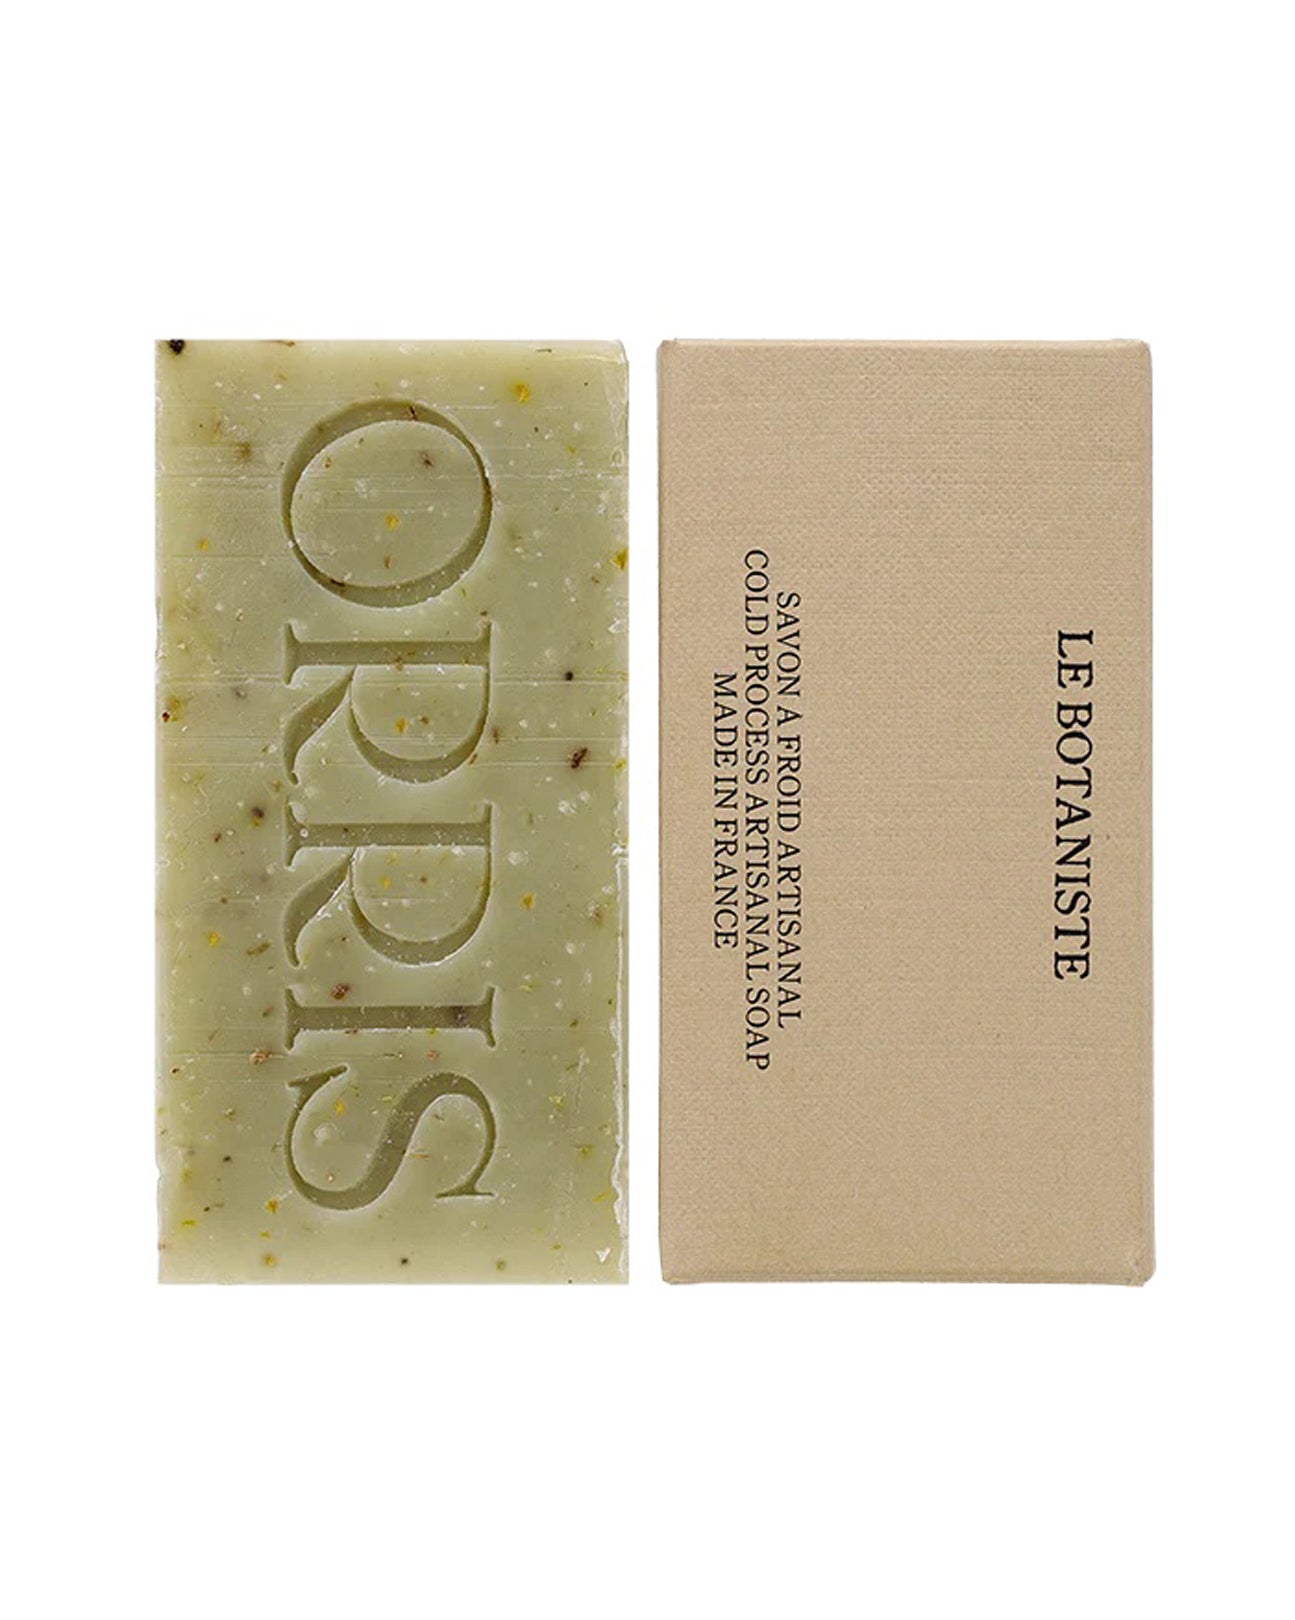 ORRIS All Natural Cold Process Soap in Le Botaniste available at Lahn.shop